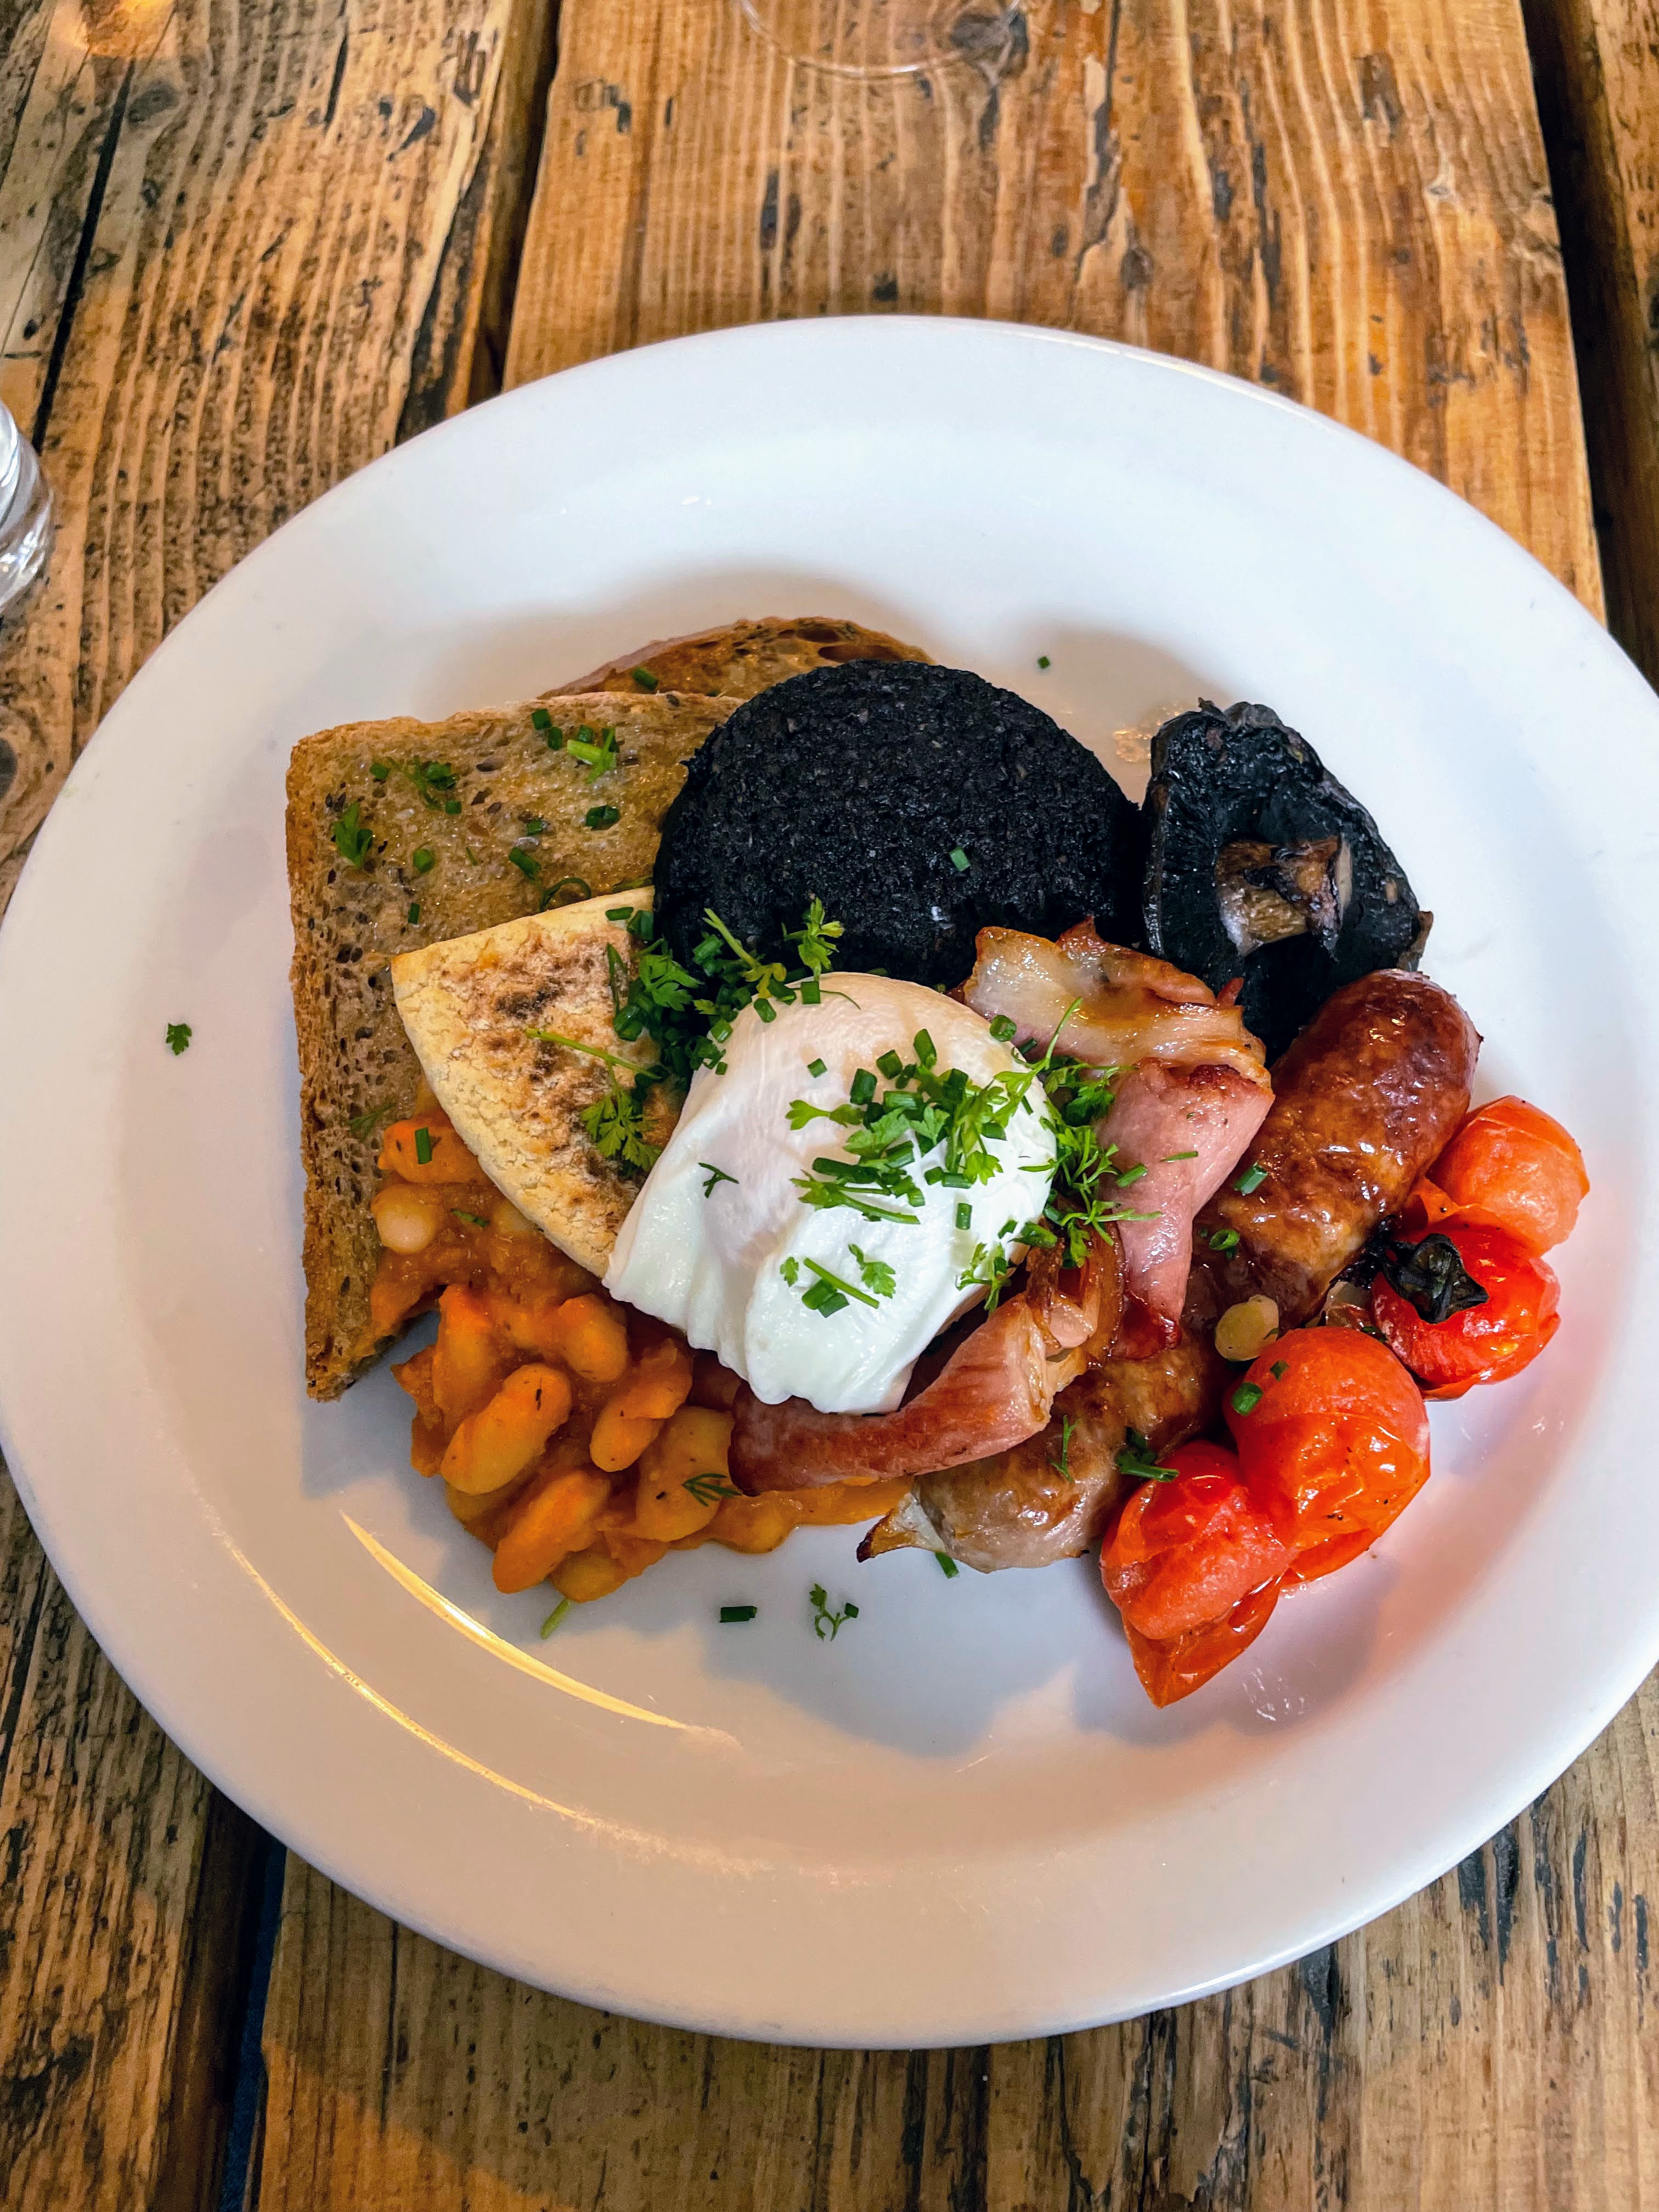 A plate of a classic a Scottish breakfast with black pudding and beans on toast in Edinburgh, Scotland